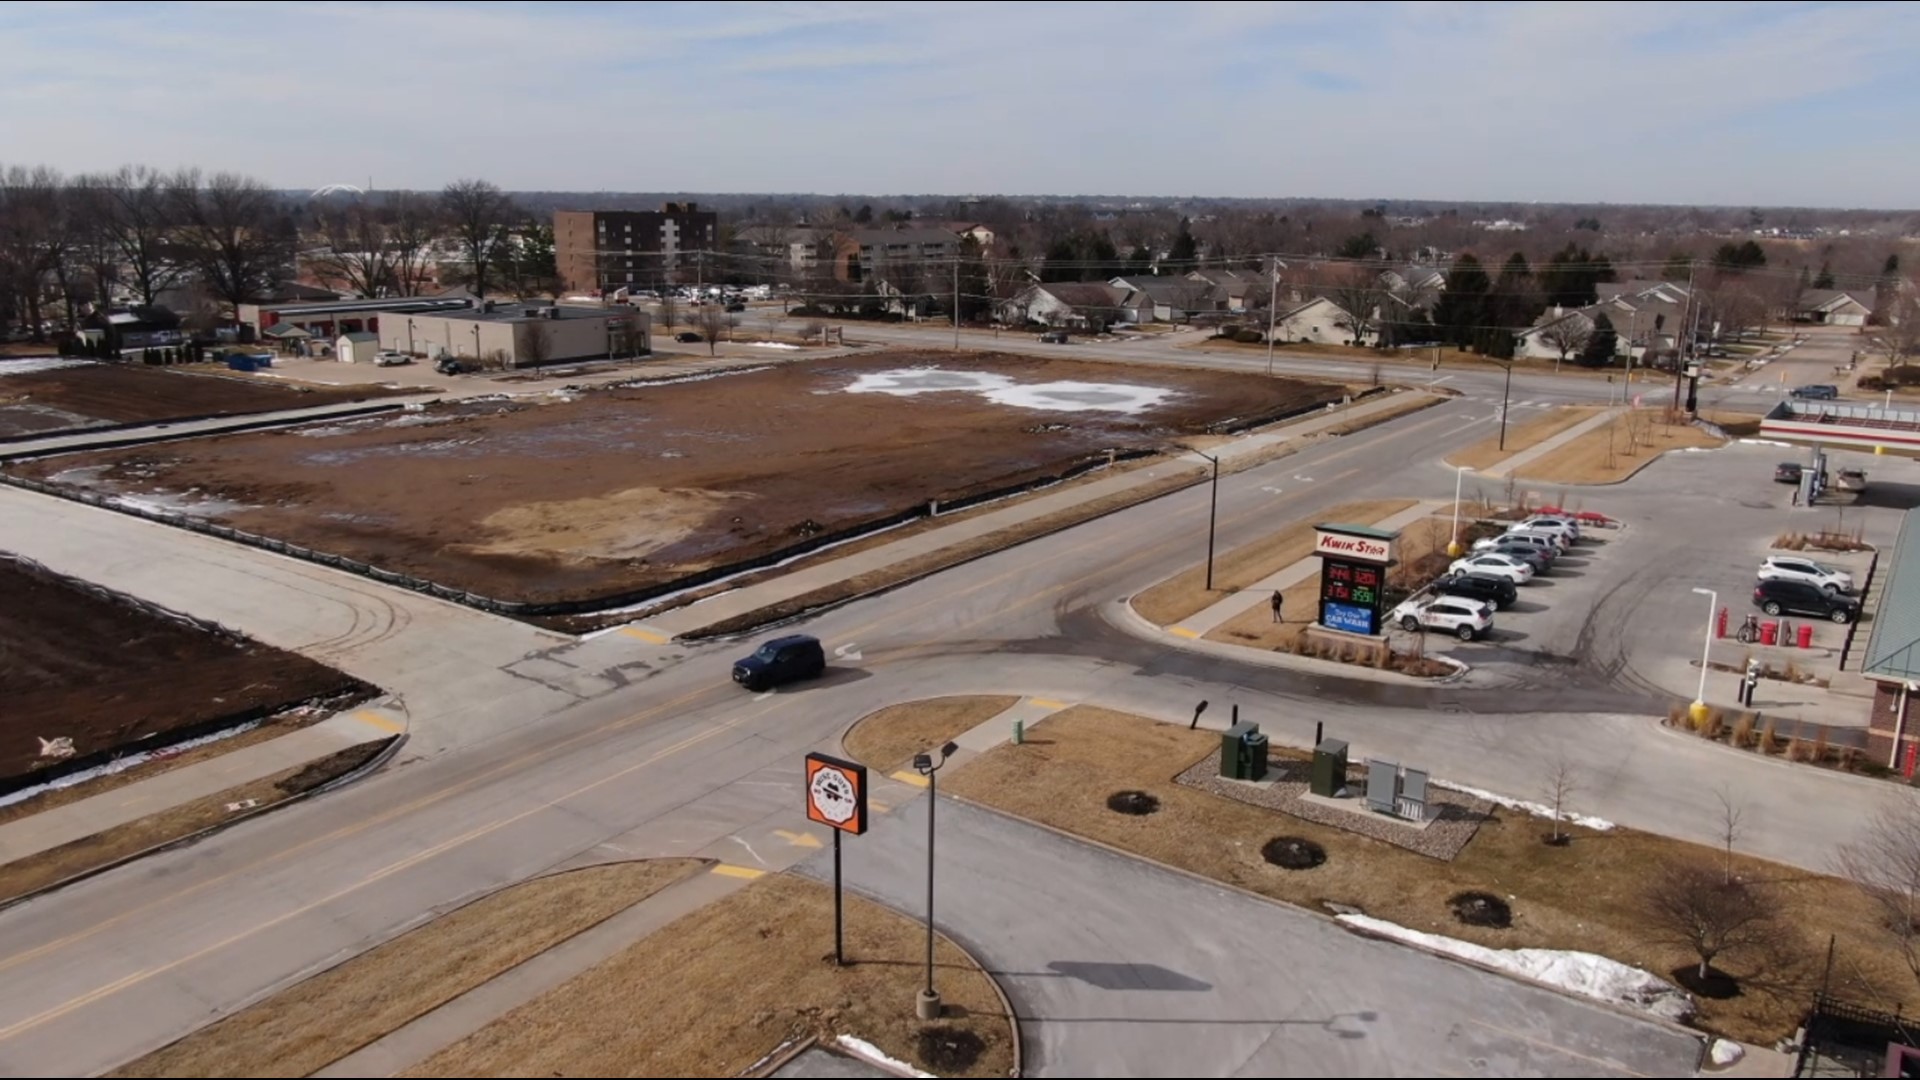 Aldi is building its first location in Bettendorf at the corner of Devils Glen Road and Belmont Road.